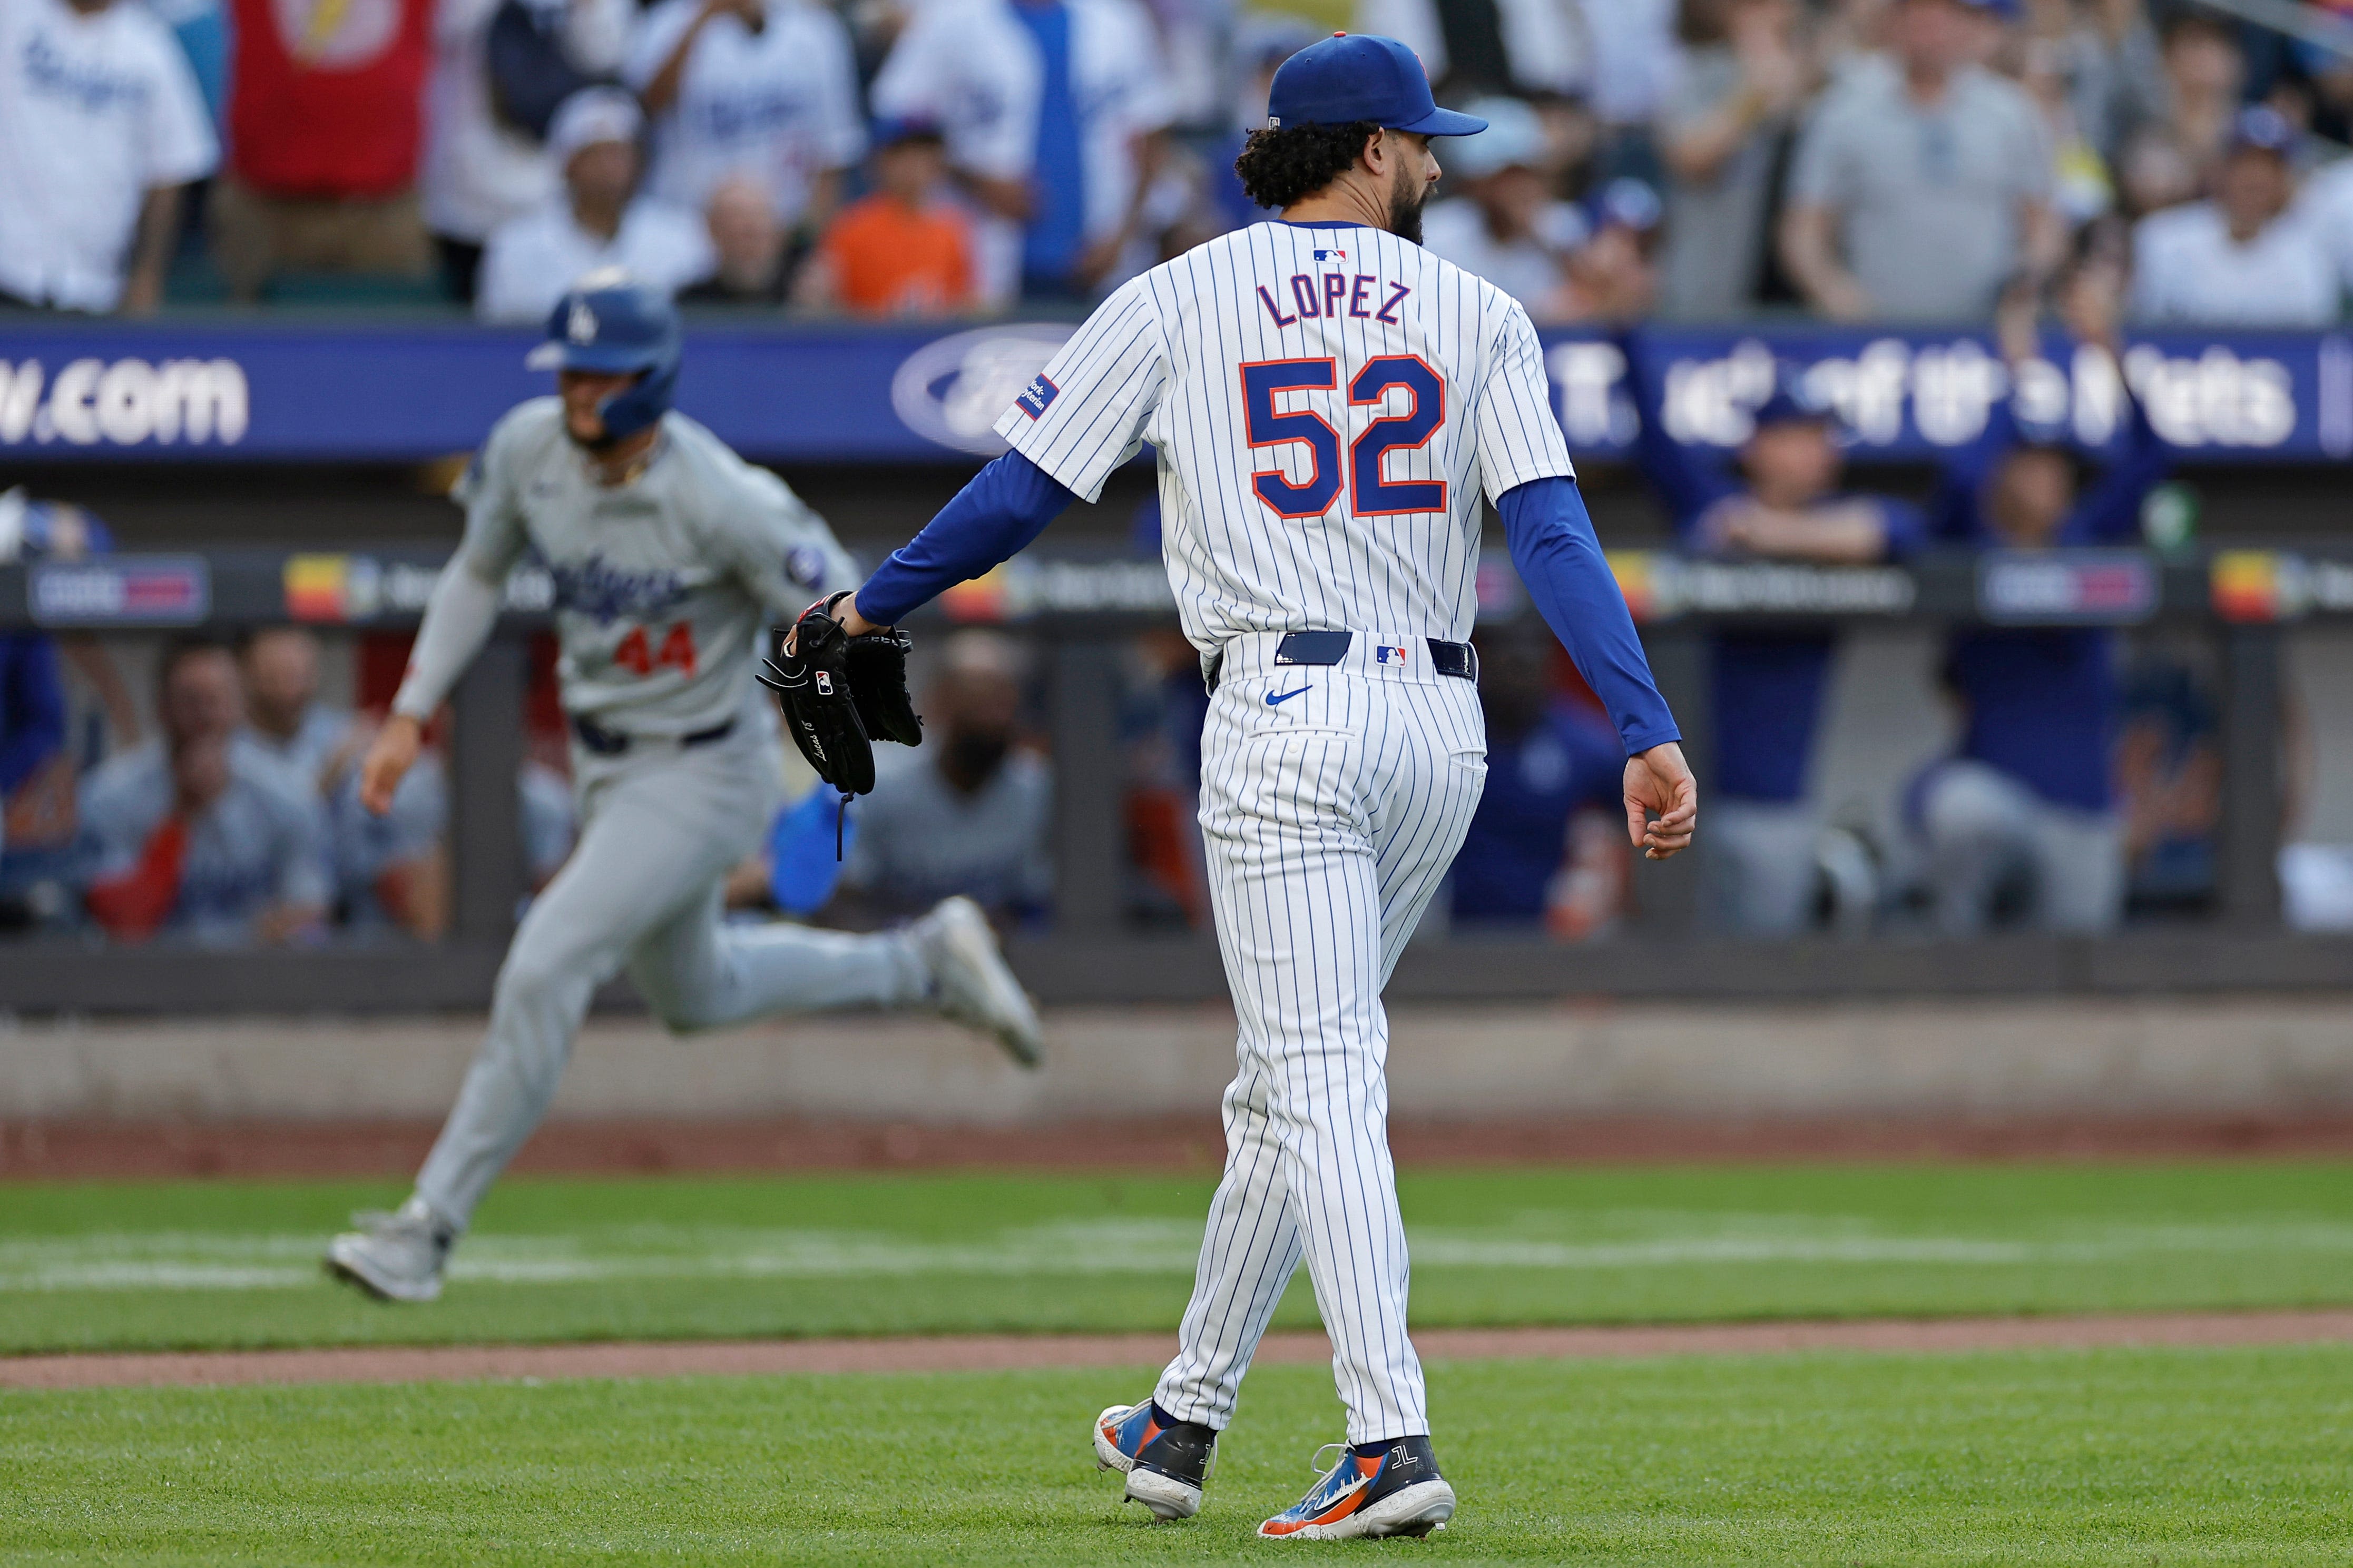 Mets expected to DFA Jorge Lopez after he throws glove into stands, calls Mets 'worst' team in MLB